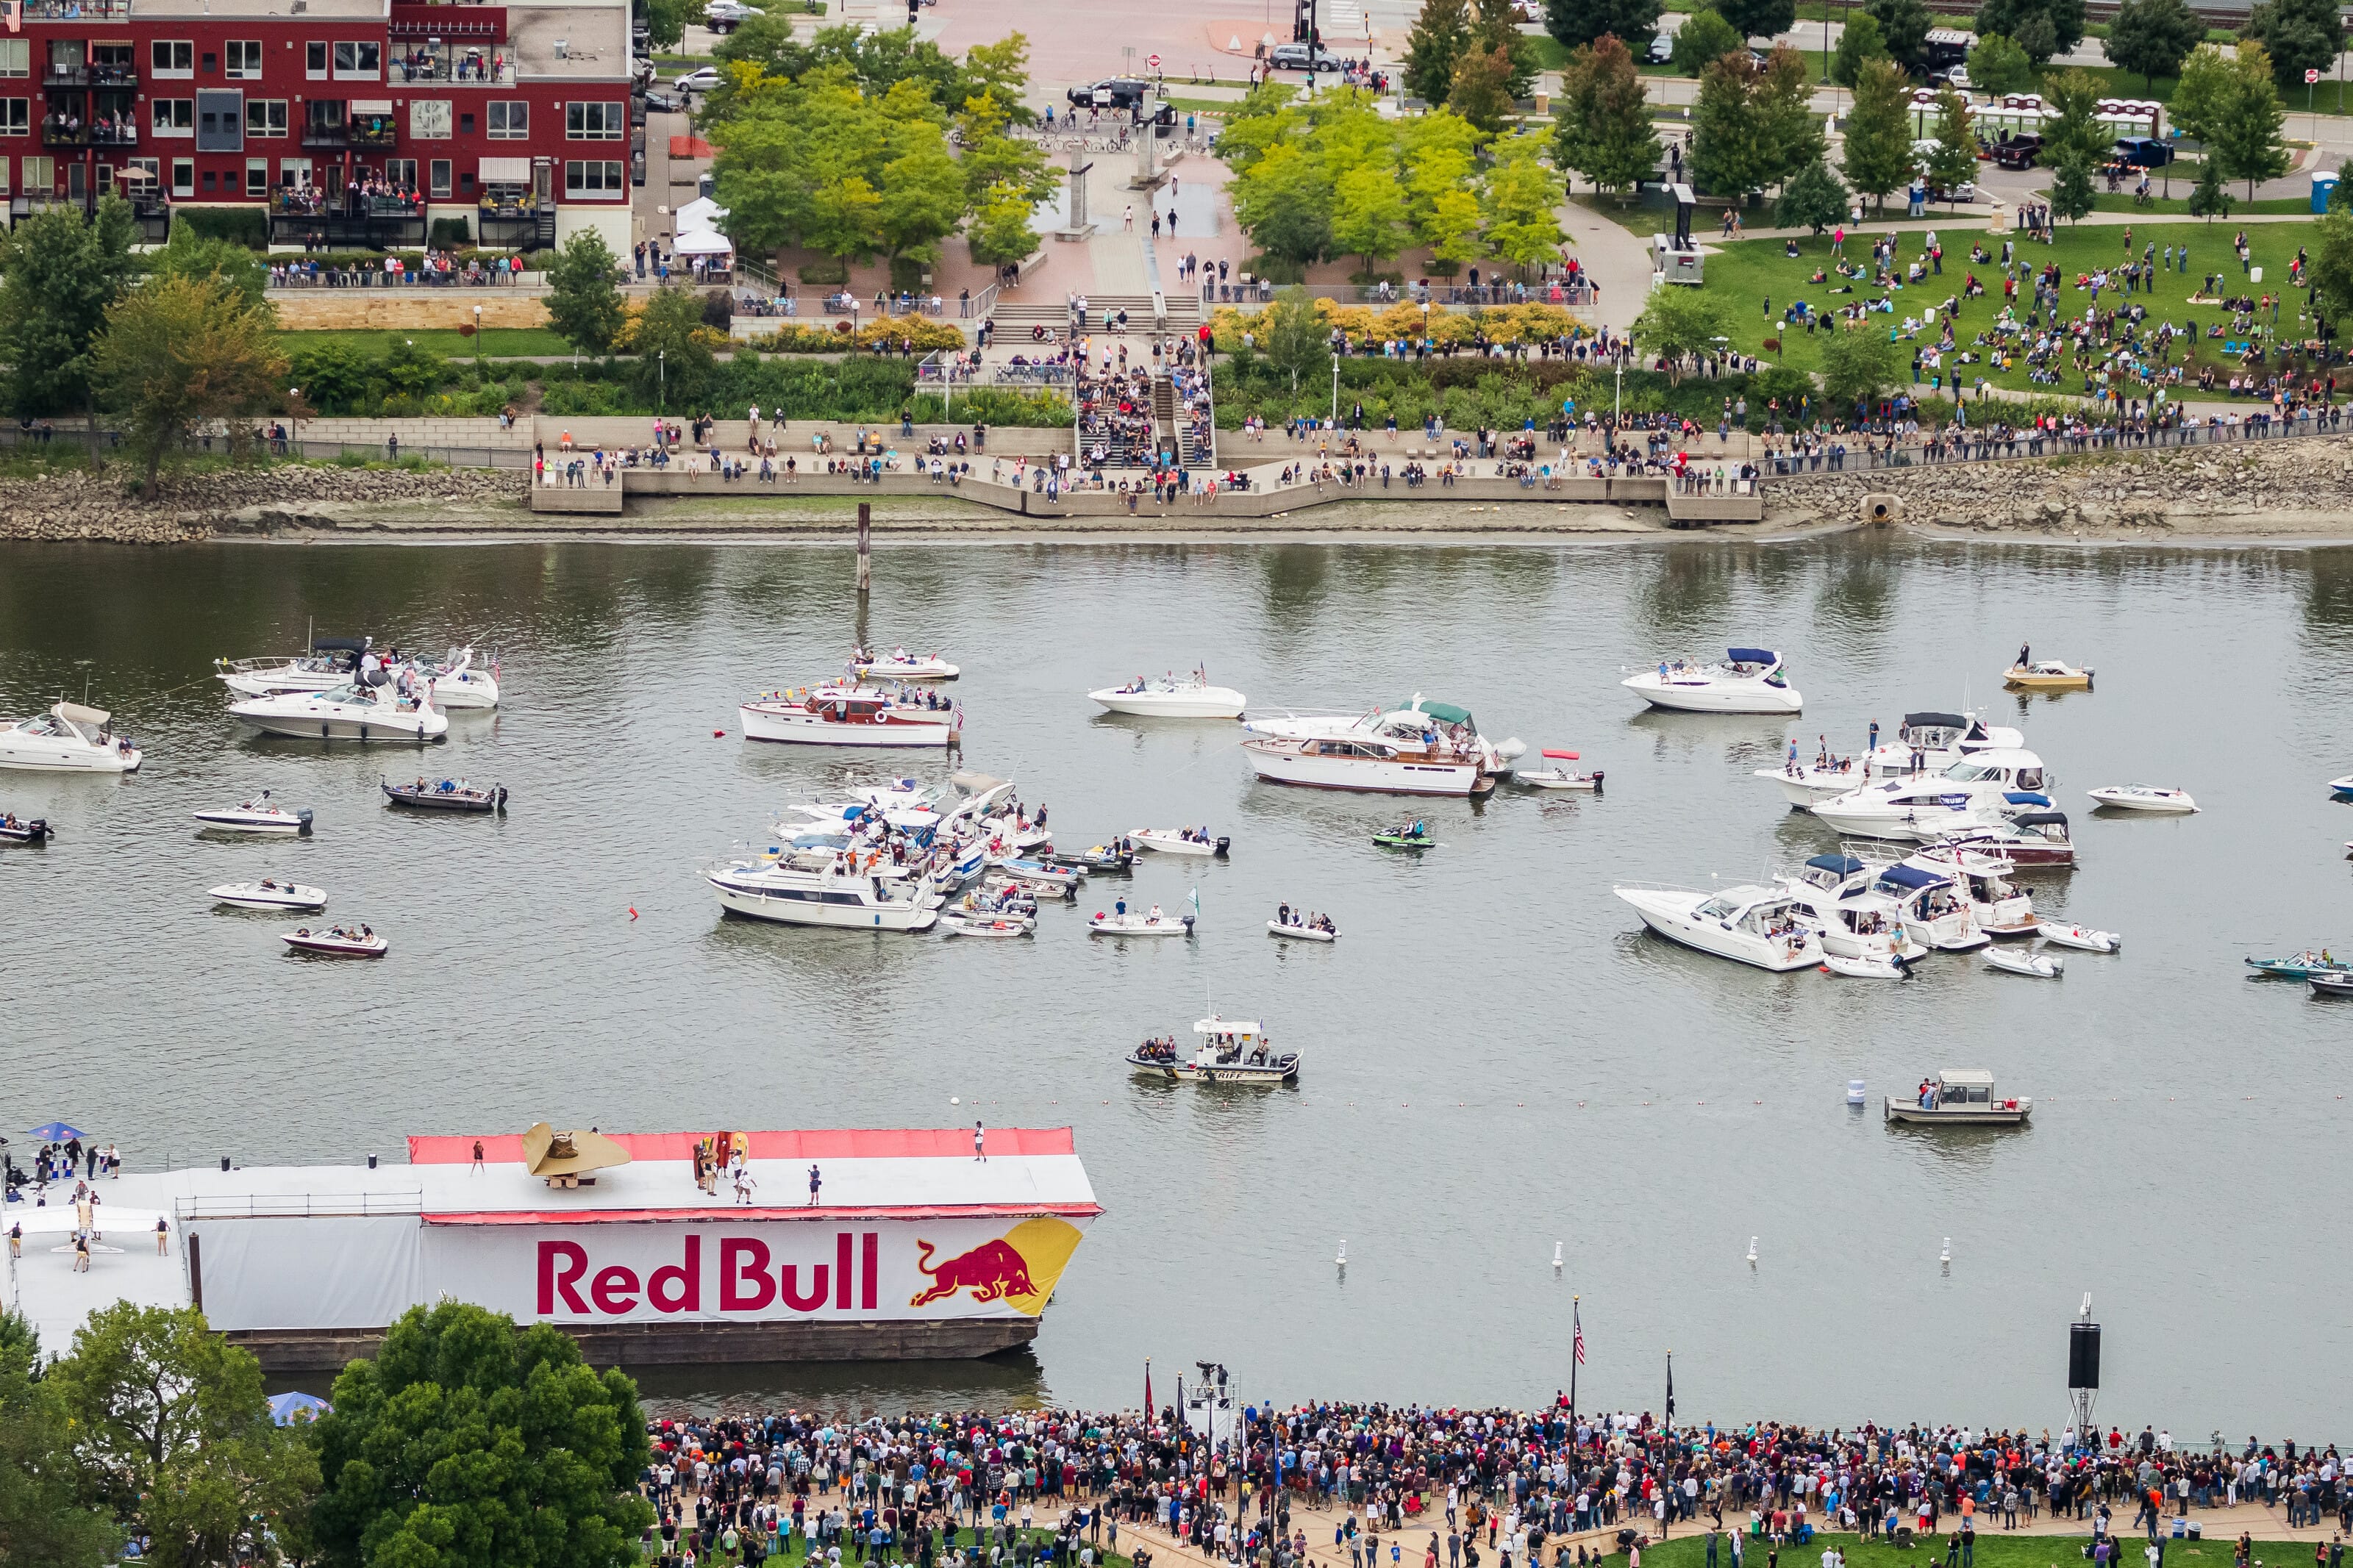 An aerial view of the Flugtag site in Downtown Saint Paul on September 7, 2019. Photo courtesy Jules Ameel / Red Bull Content Pool